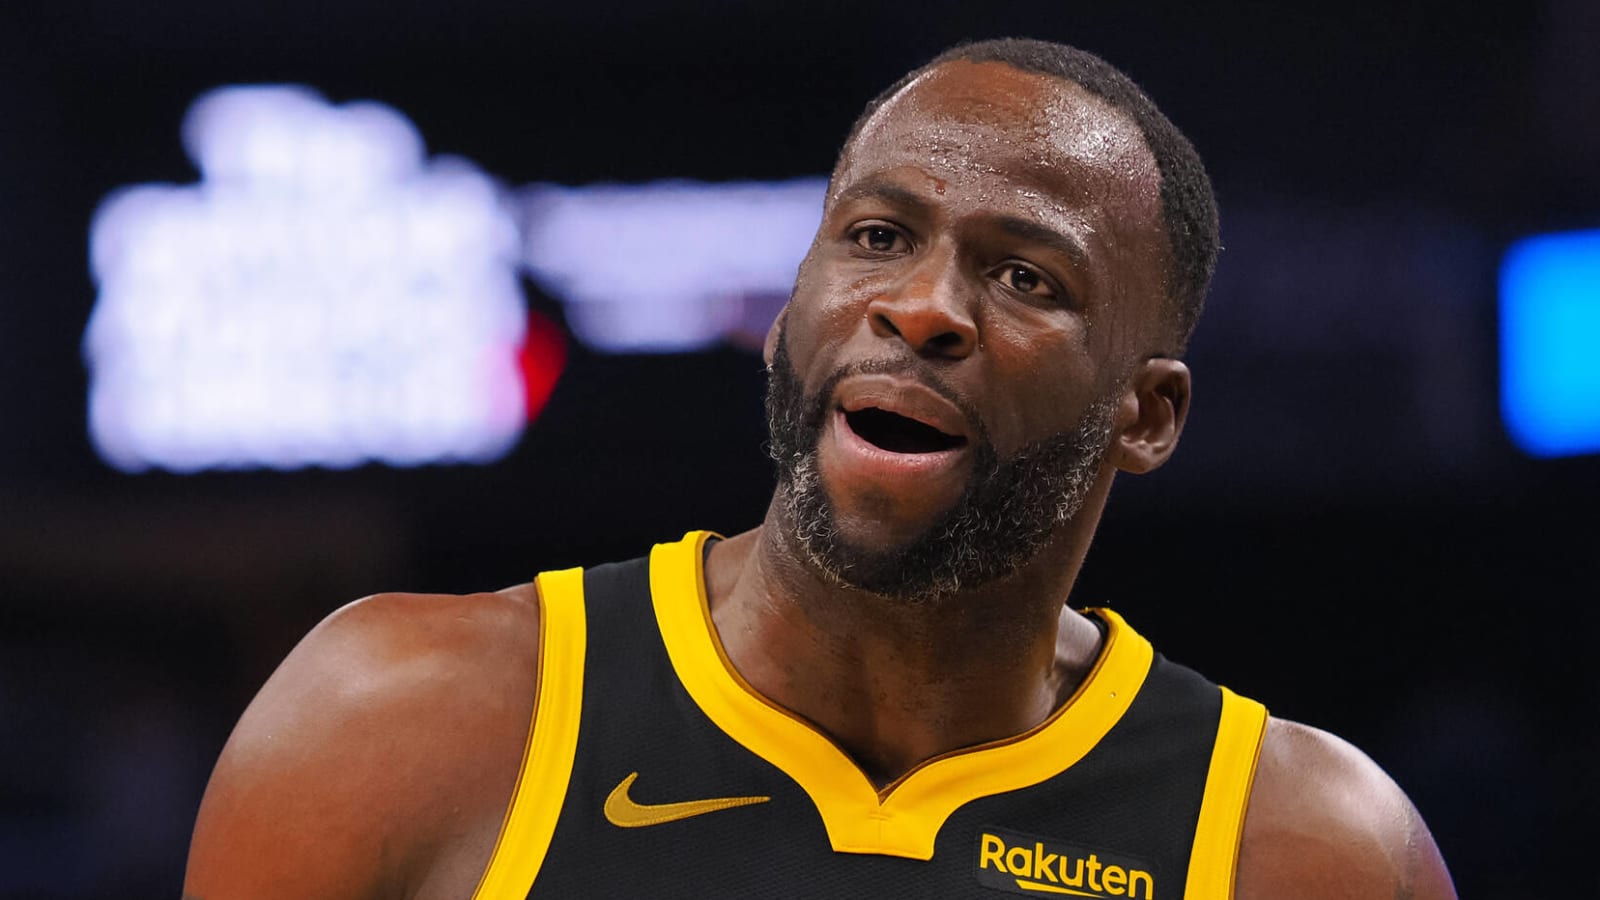 Draymond Green opens up about five-game suspension